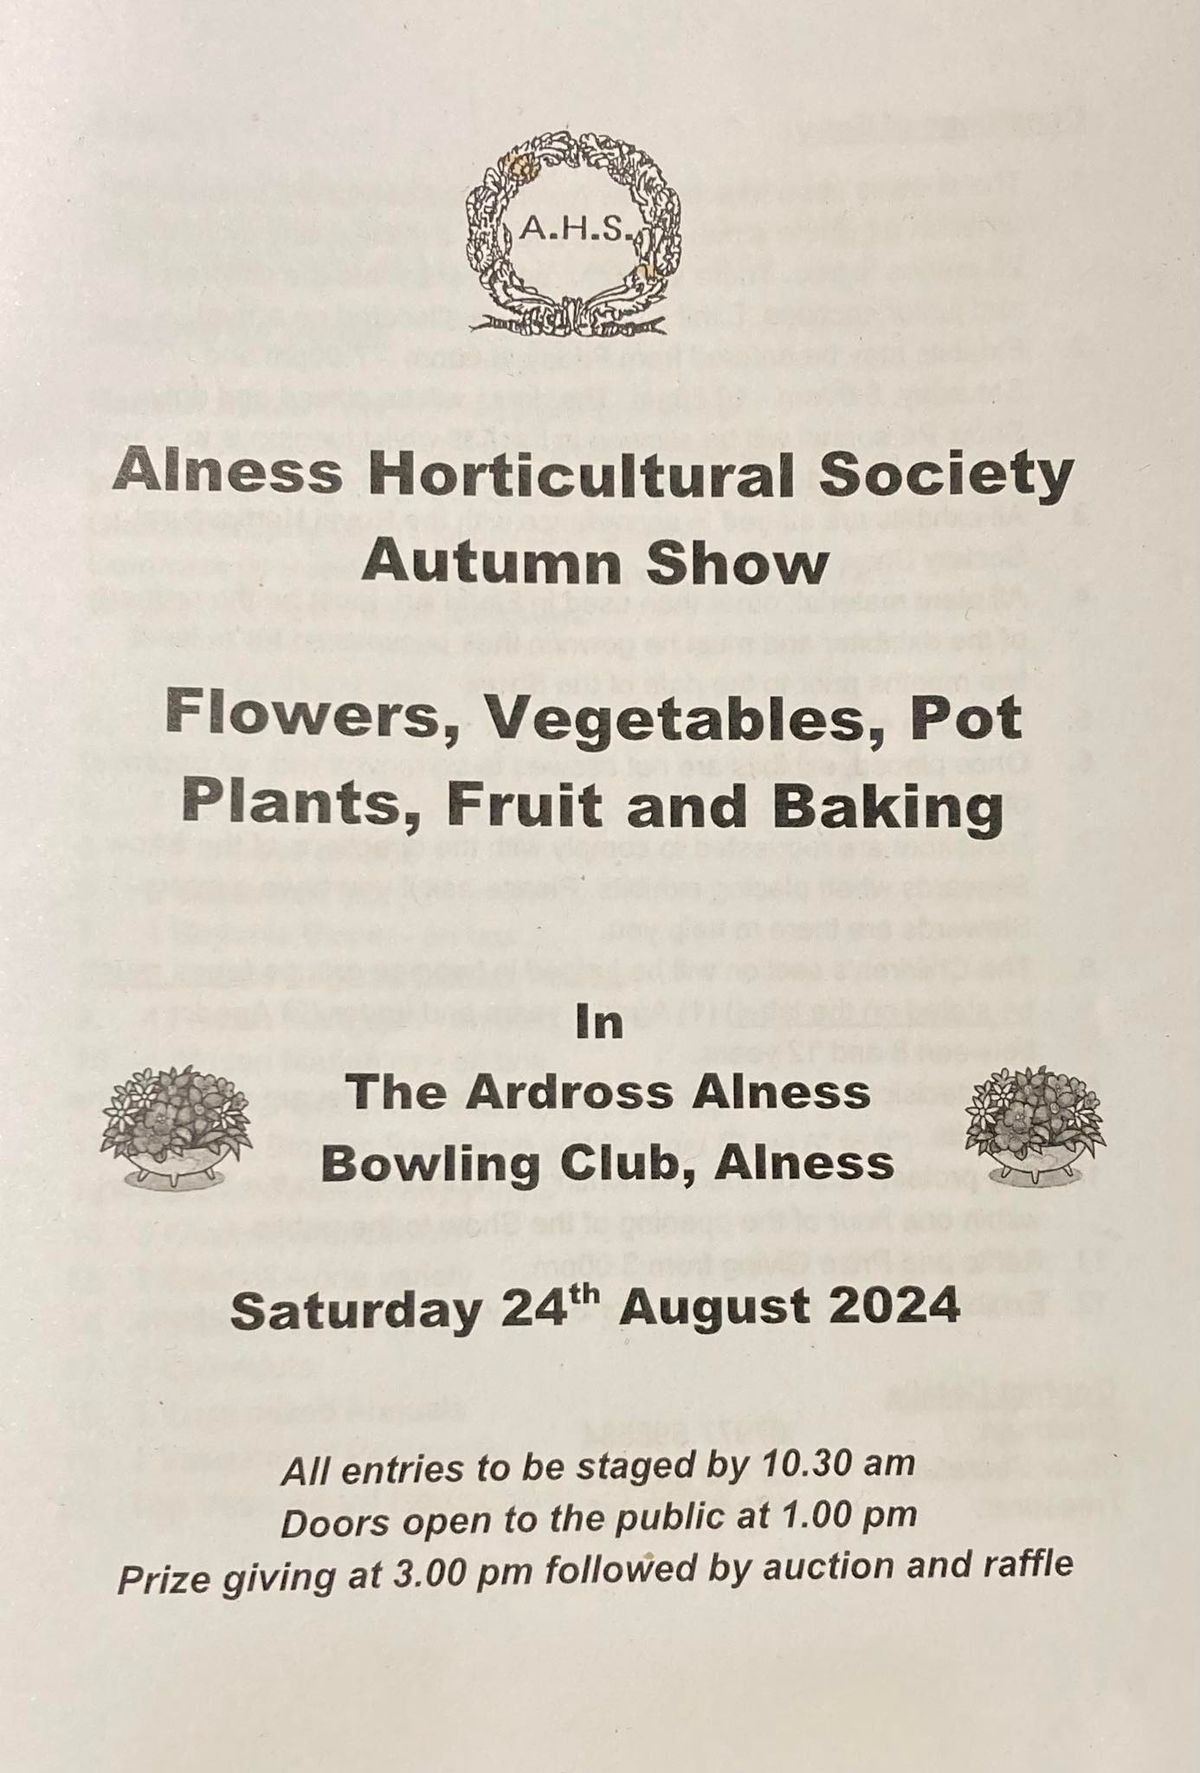 Alness Horticultual Society Autumn Show